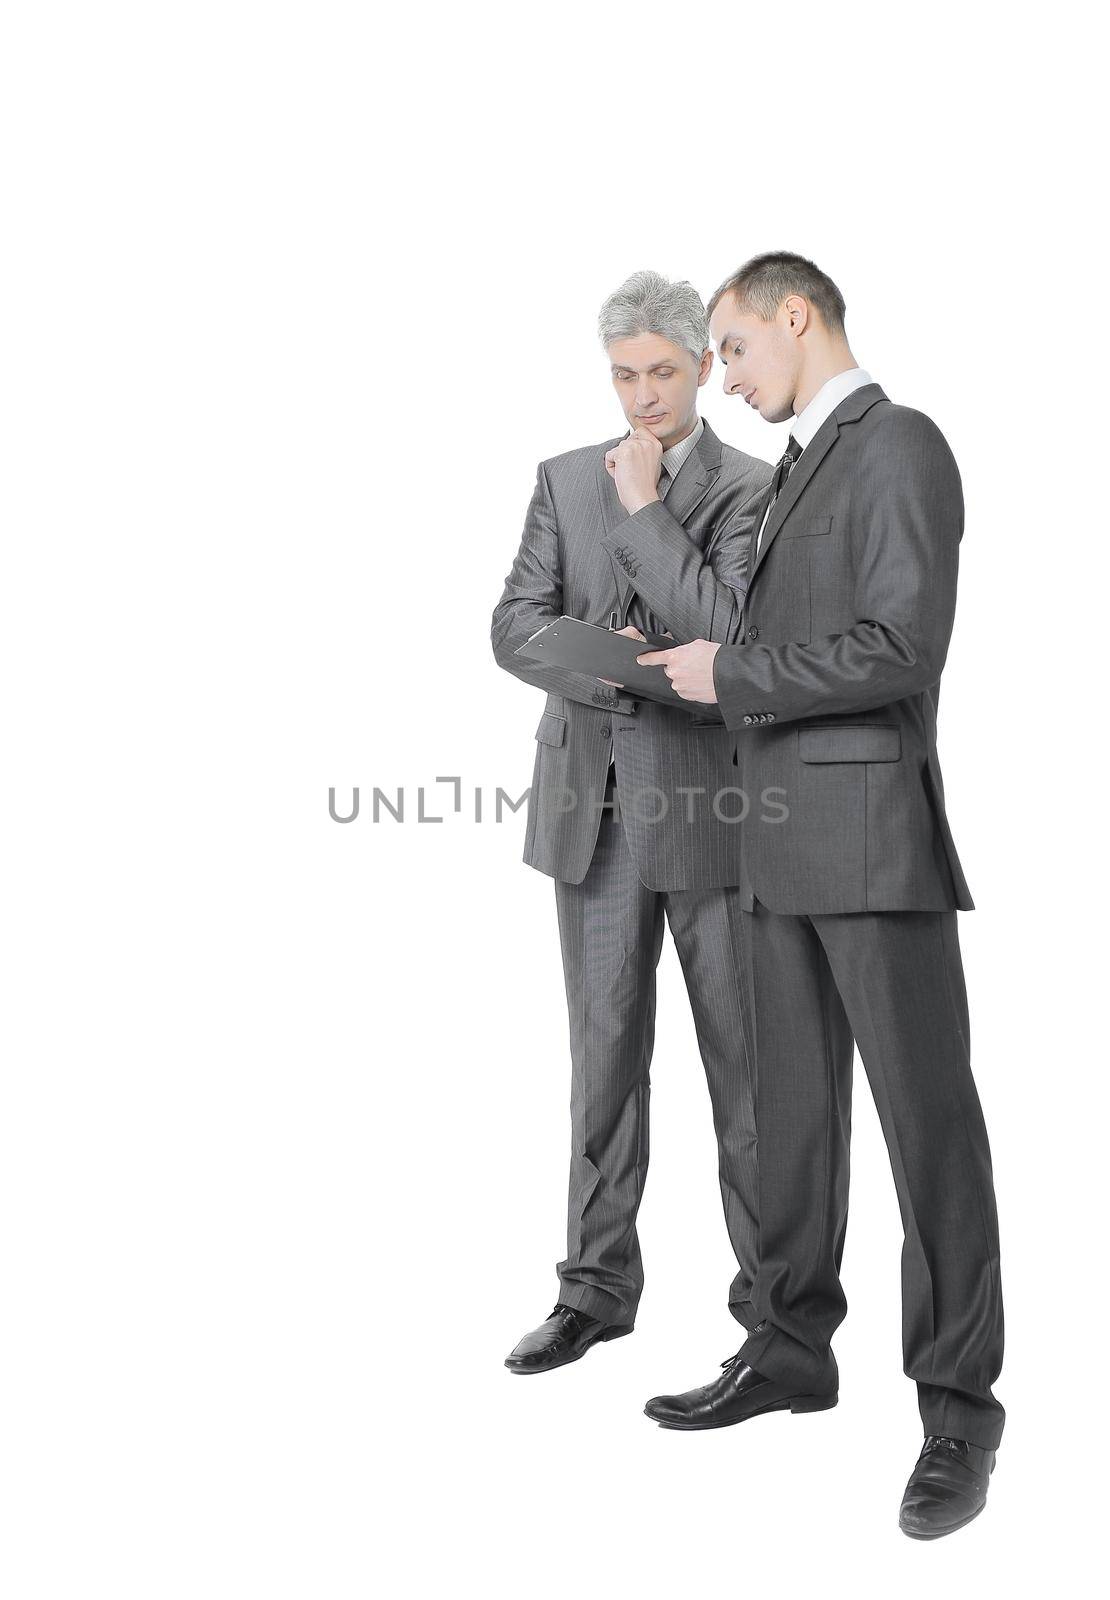 two members of the company discussing a working paper.isolated on a white background.